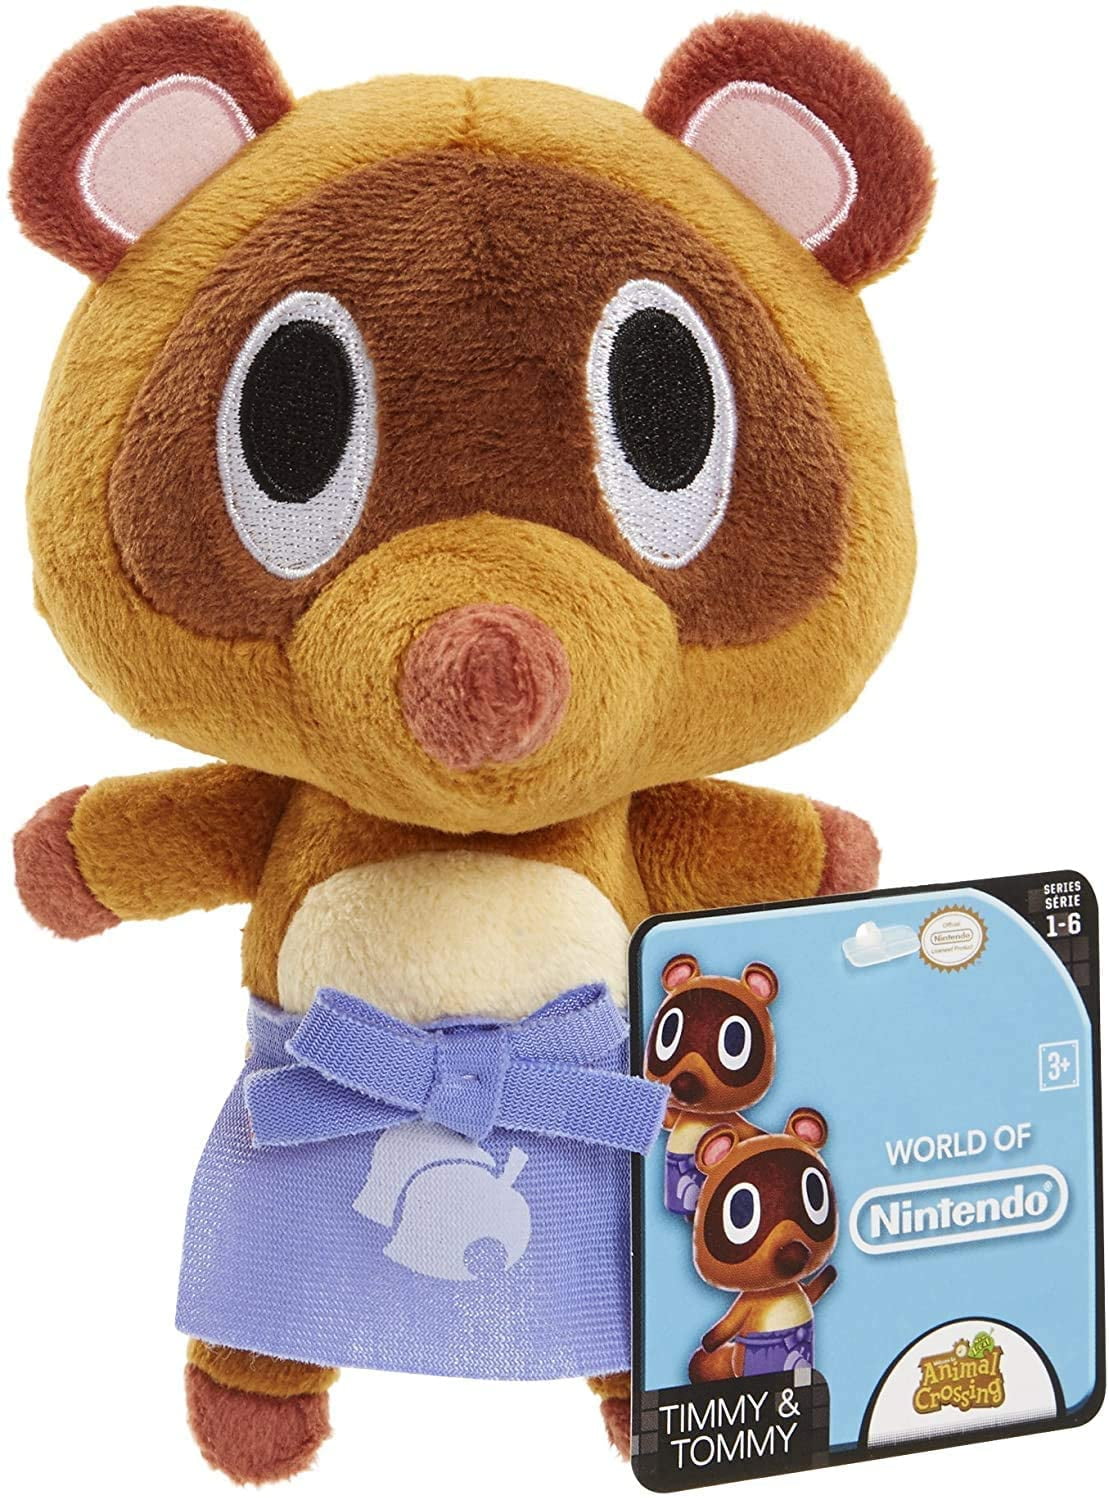 Animal Crossing New Horizons Tom Nook Tommy Timmy  Plush Doll Stuffed Toy Gift 